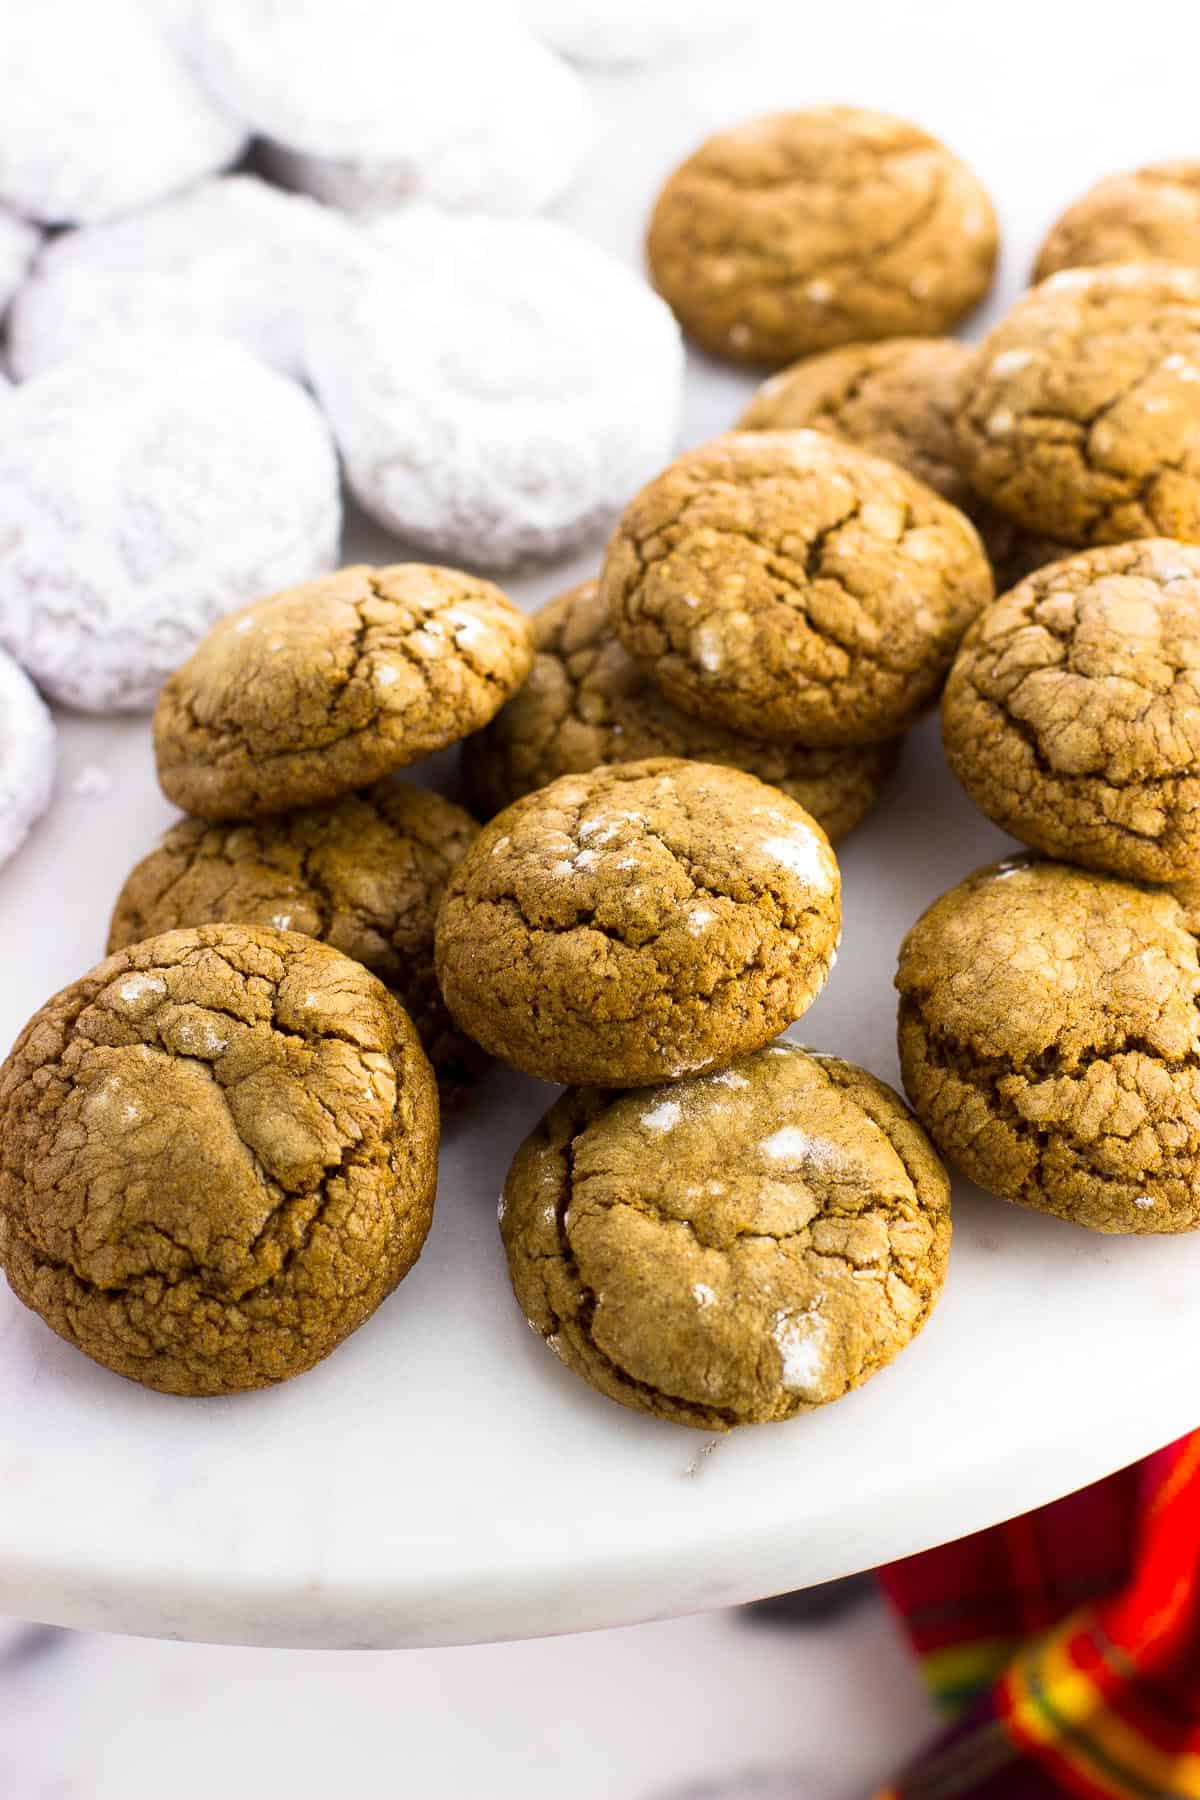 A platter of pfeffernusse cookies with one half as-is and the other half coated in powdered sugar